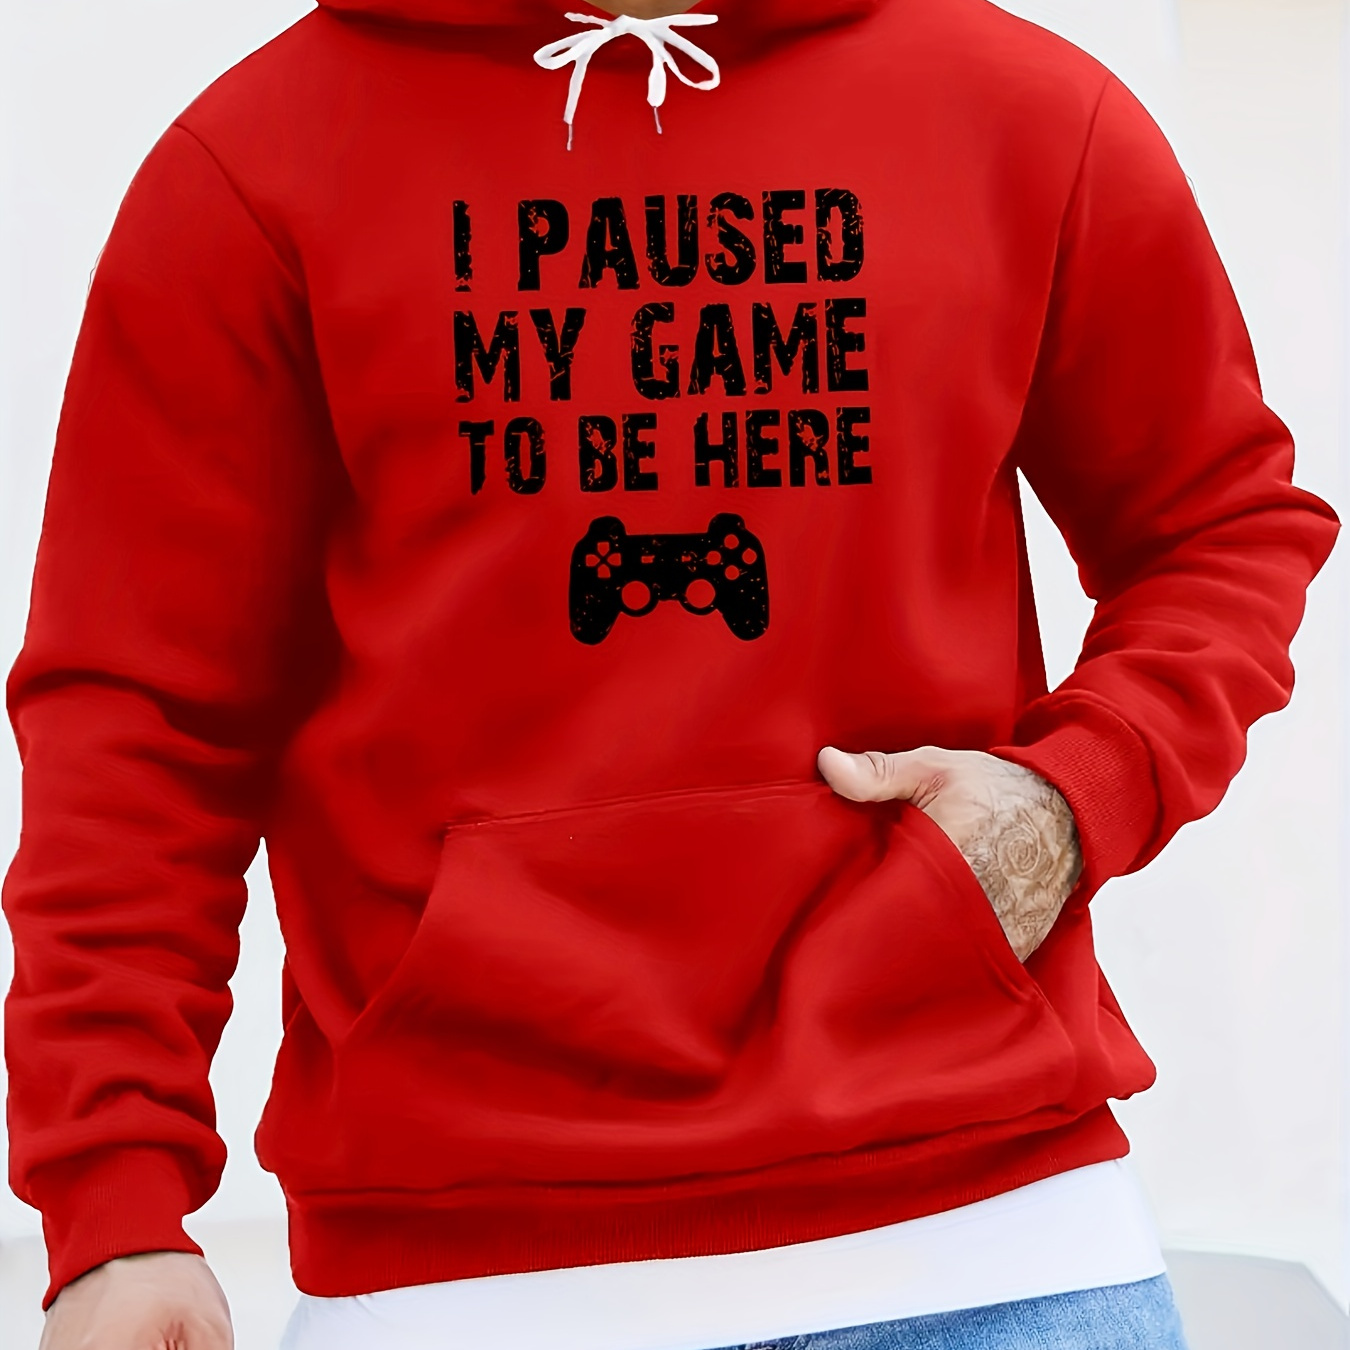 

I Paused My Game To Be Here Print Hoodies, Fashion Hooded Sweatshirt With Kangaroo Pocket, Casual Tops For Spring Autumn, Men's Clothing